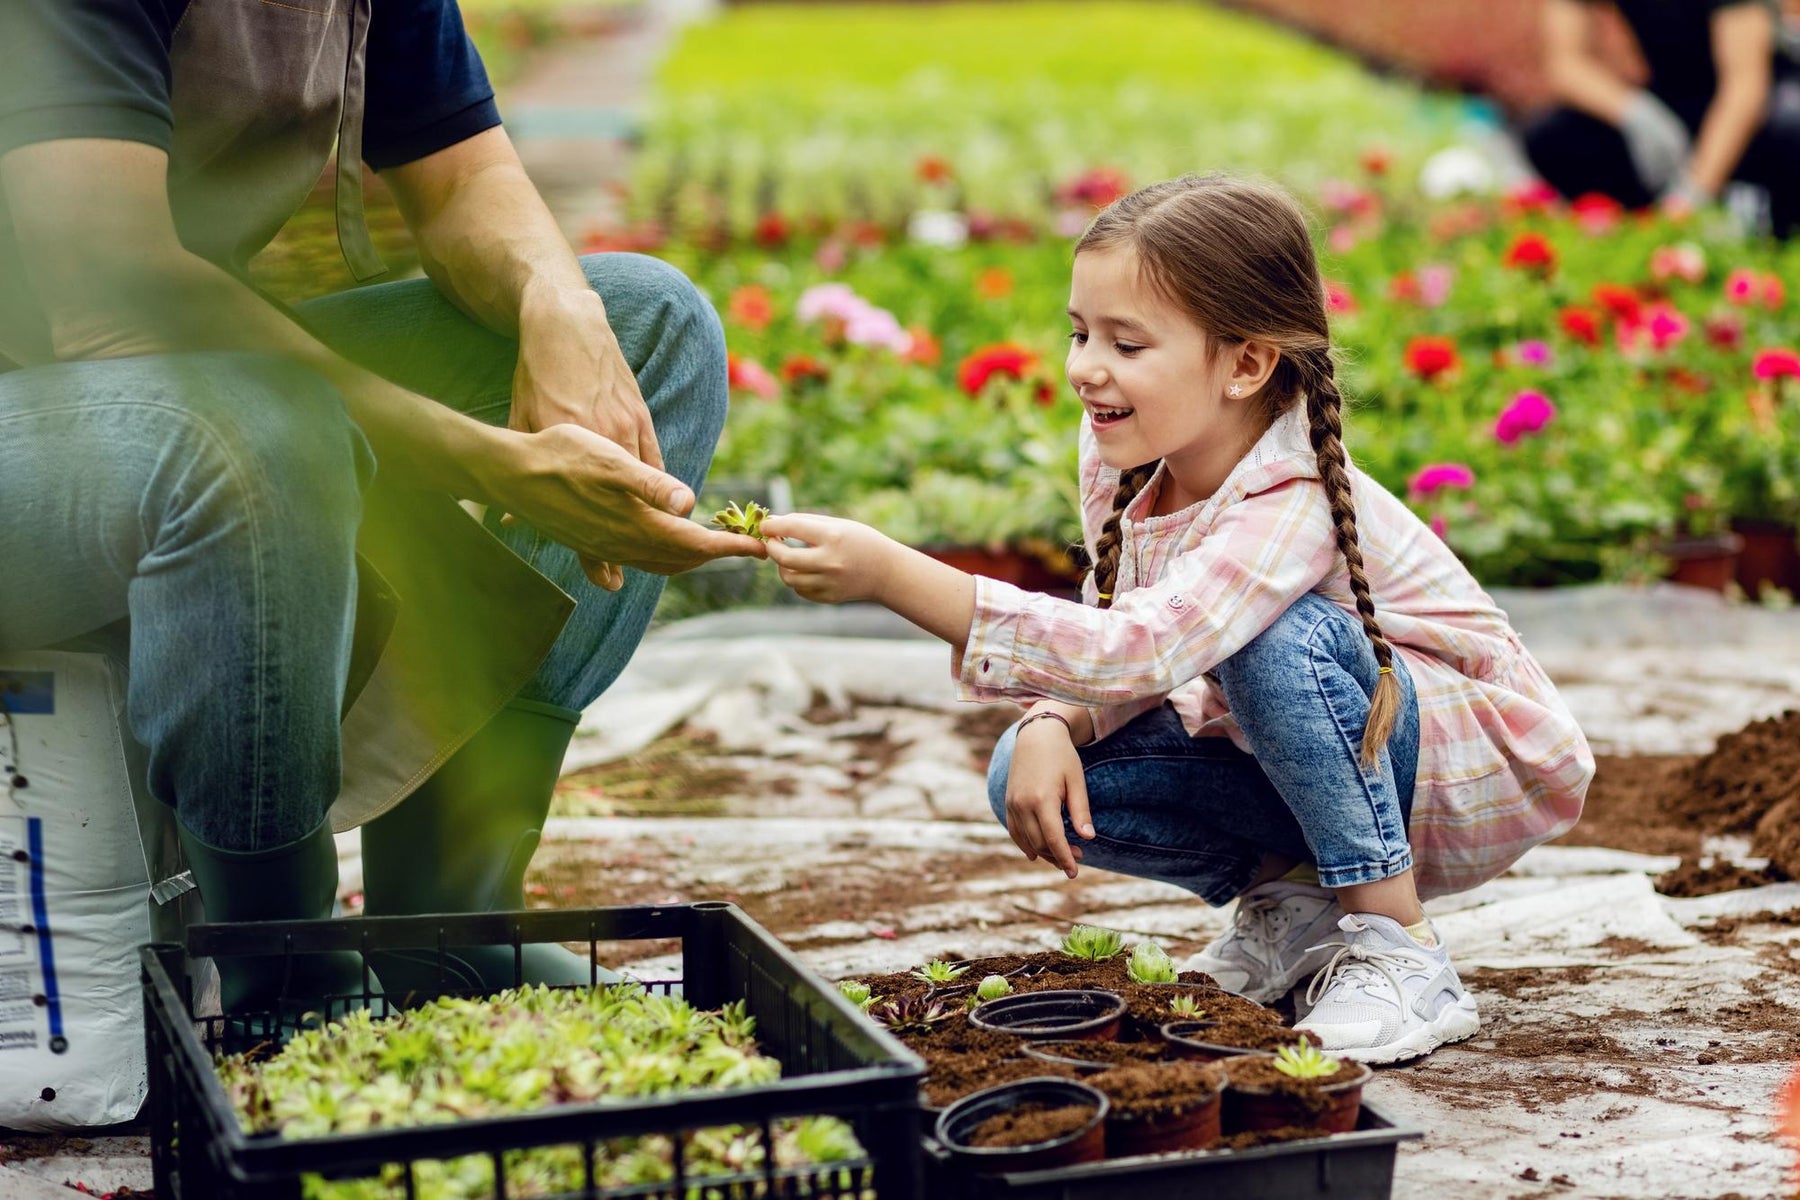 Top 7 Tips for Getting Children into The Garden